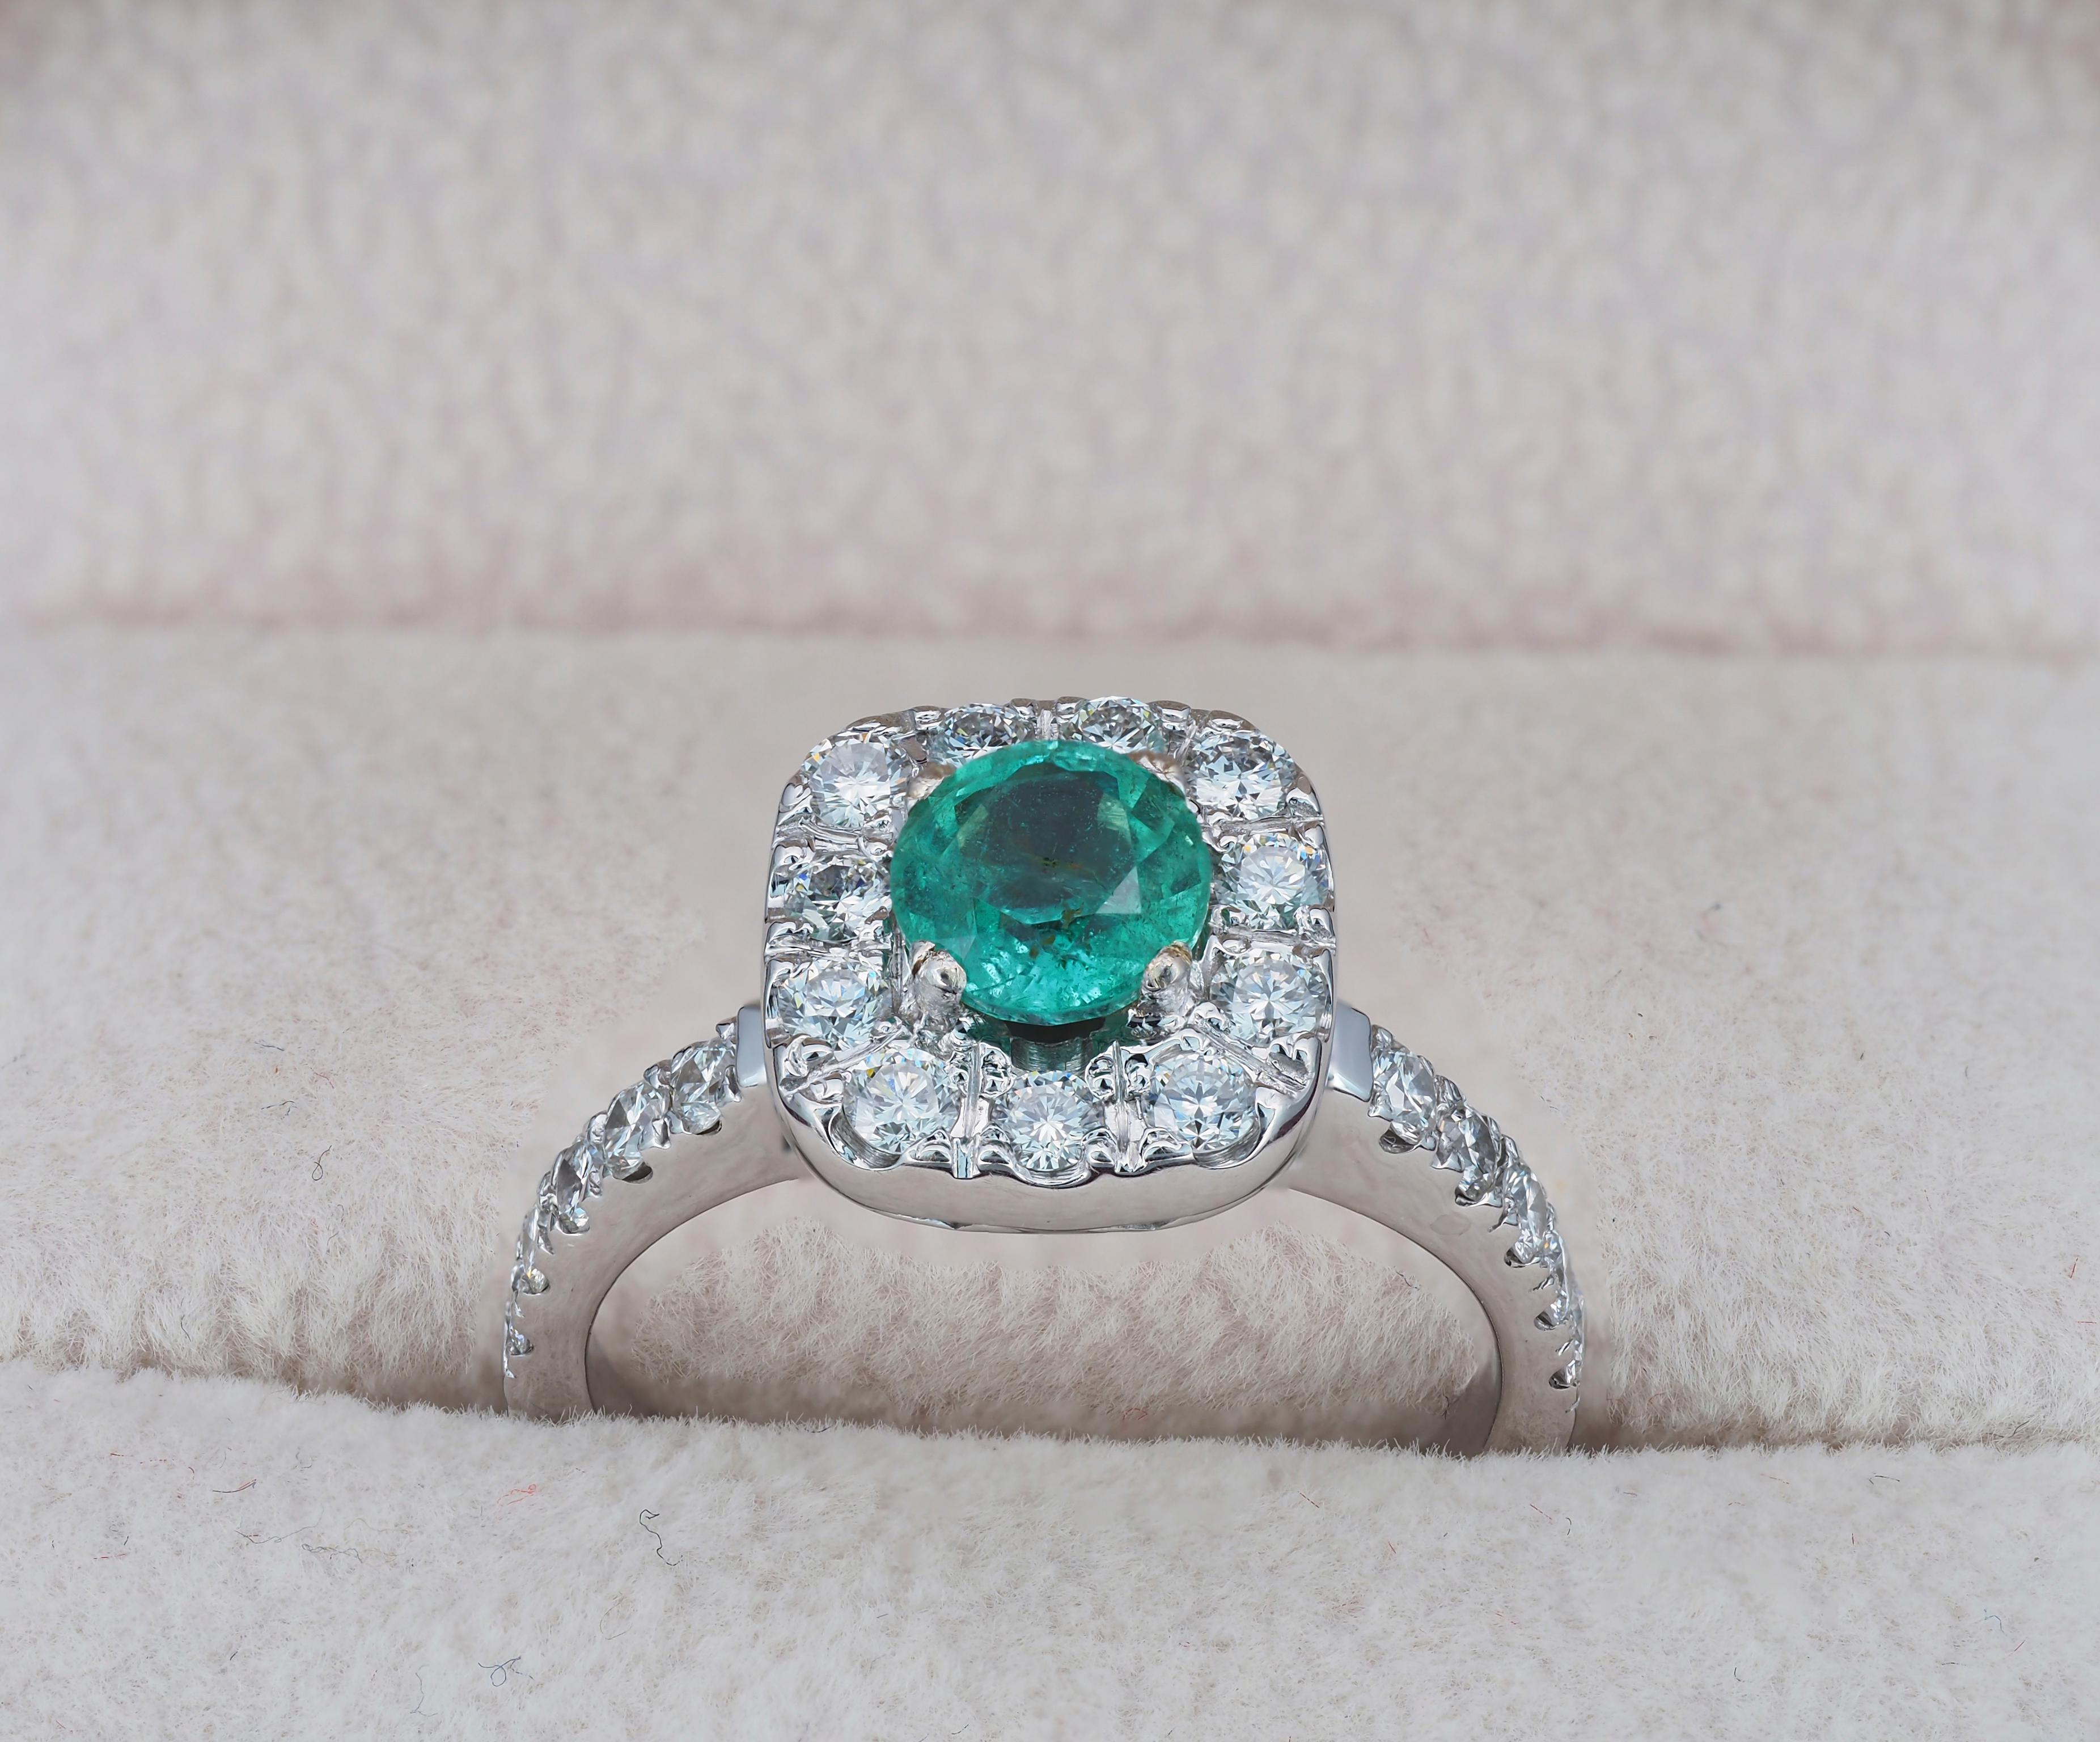 For Sale:  Emerald and Diamonds 14k Gold Ring, Vintage Style Emerald and Diamonds Ring 5